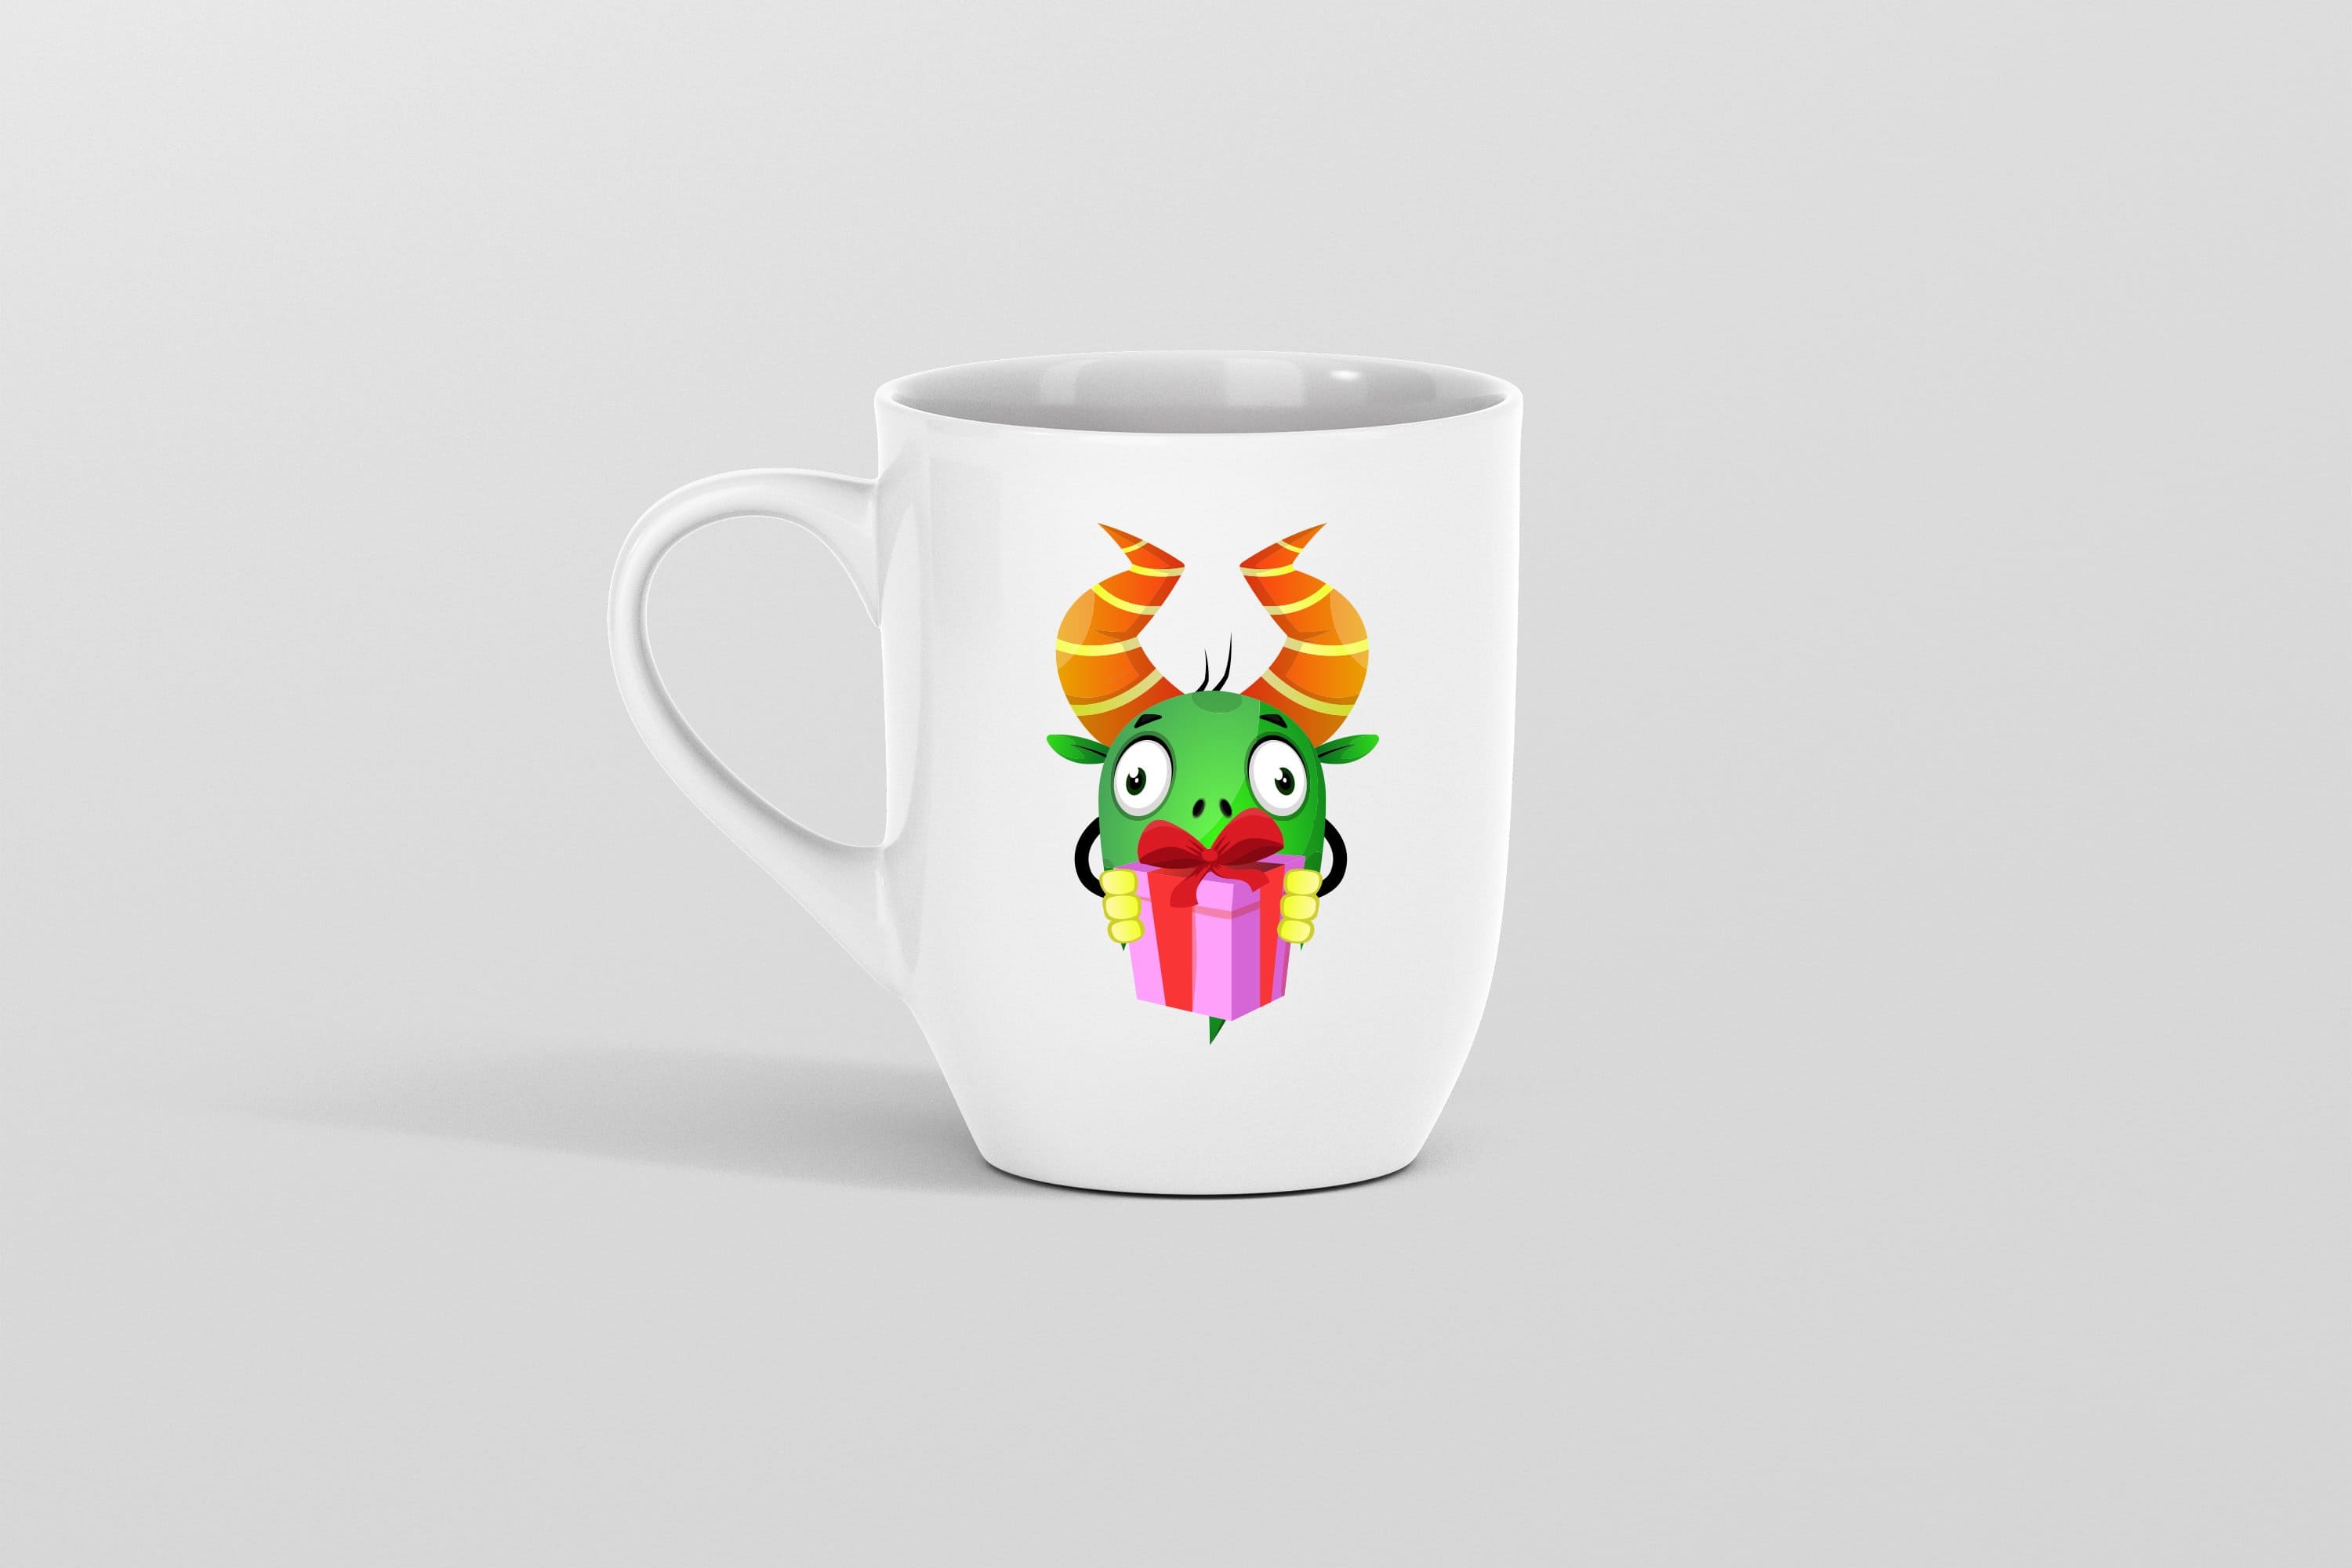 A cup with a monster print.